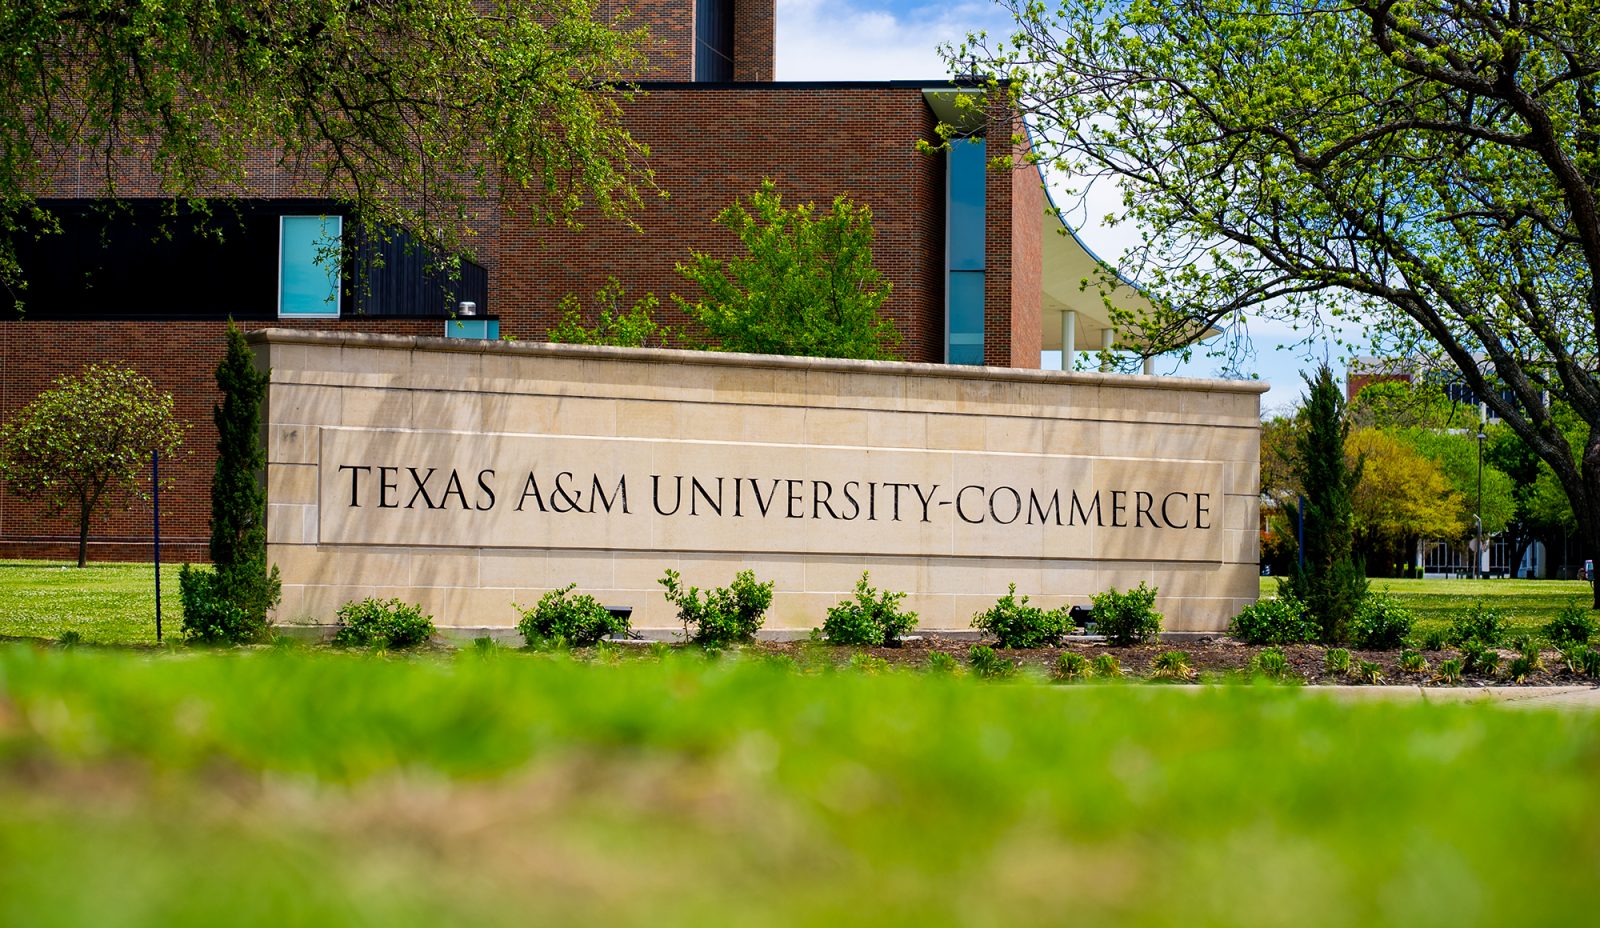 A campus sign saying Texas A&M University-Commerce